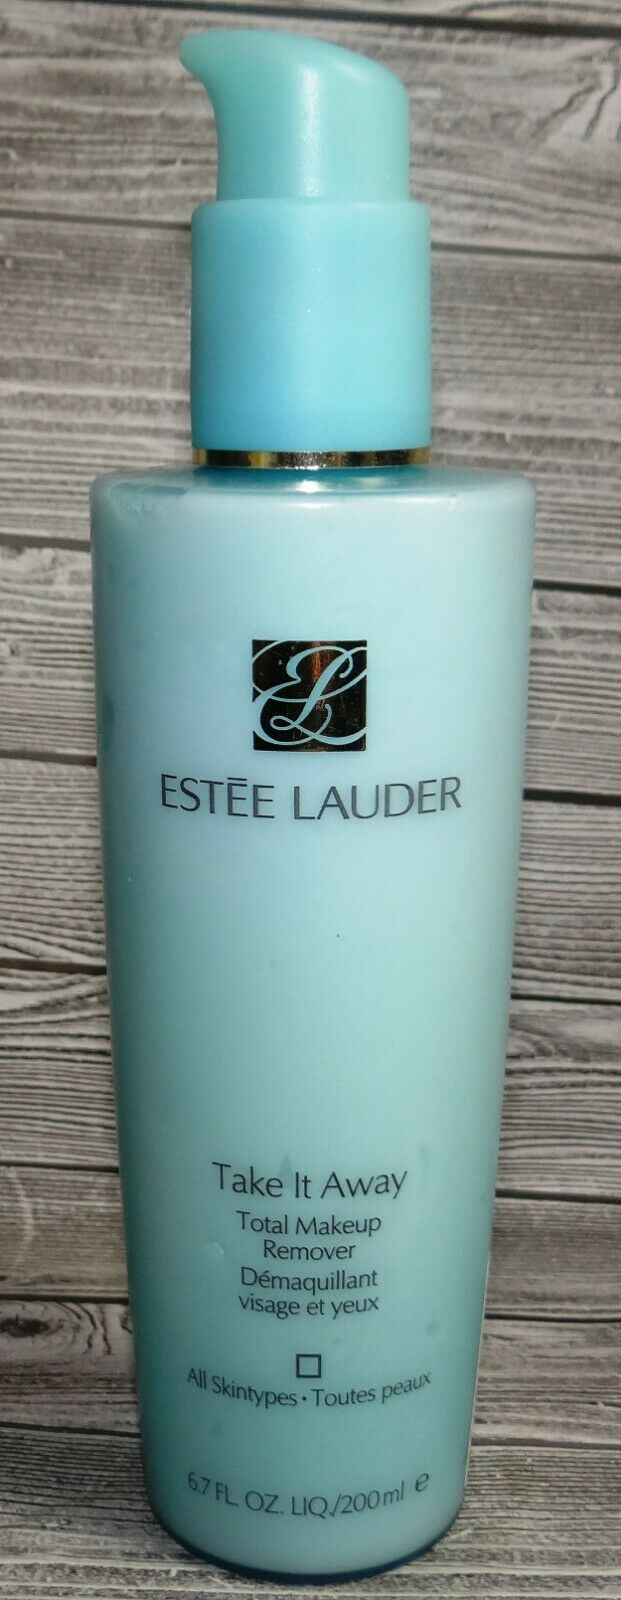 ESTEE LAUDER TAKE IT AWAY TOTAL MAKEUP REMOVER ~ 6.7oz 200ml ~ FULL SIZE ~ NEW